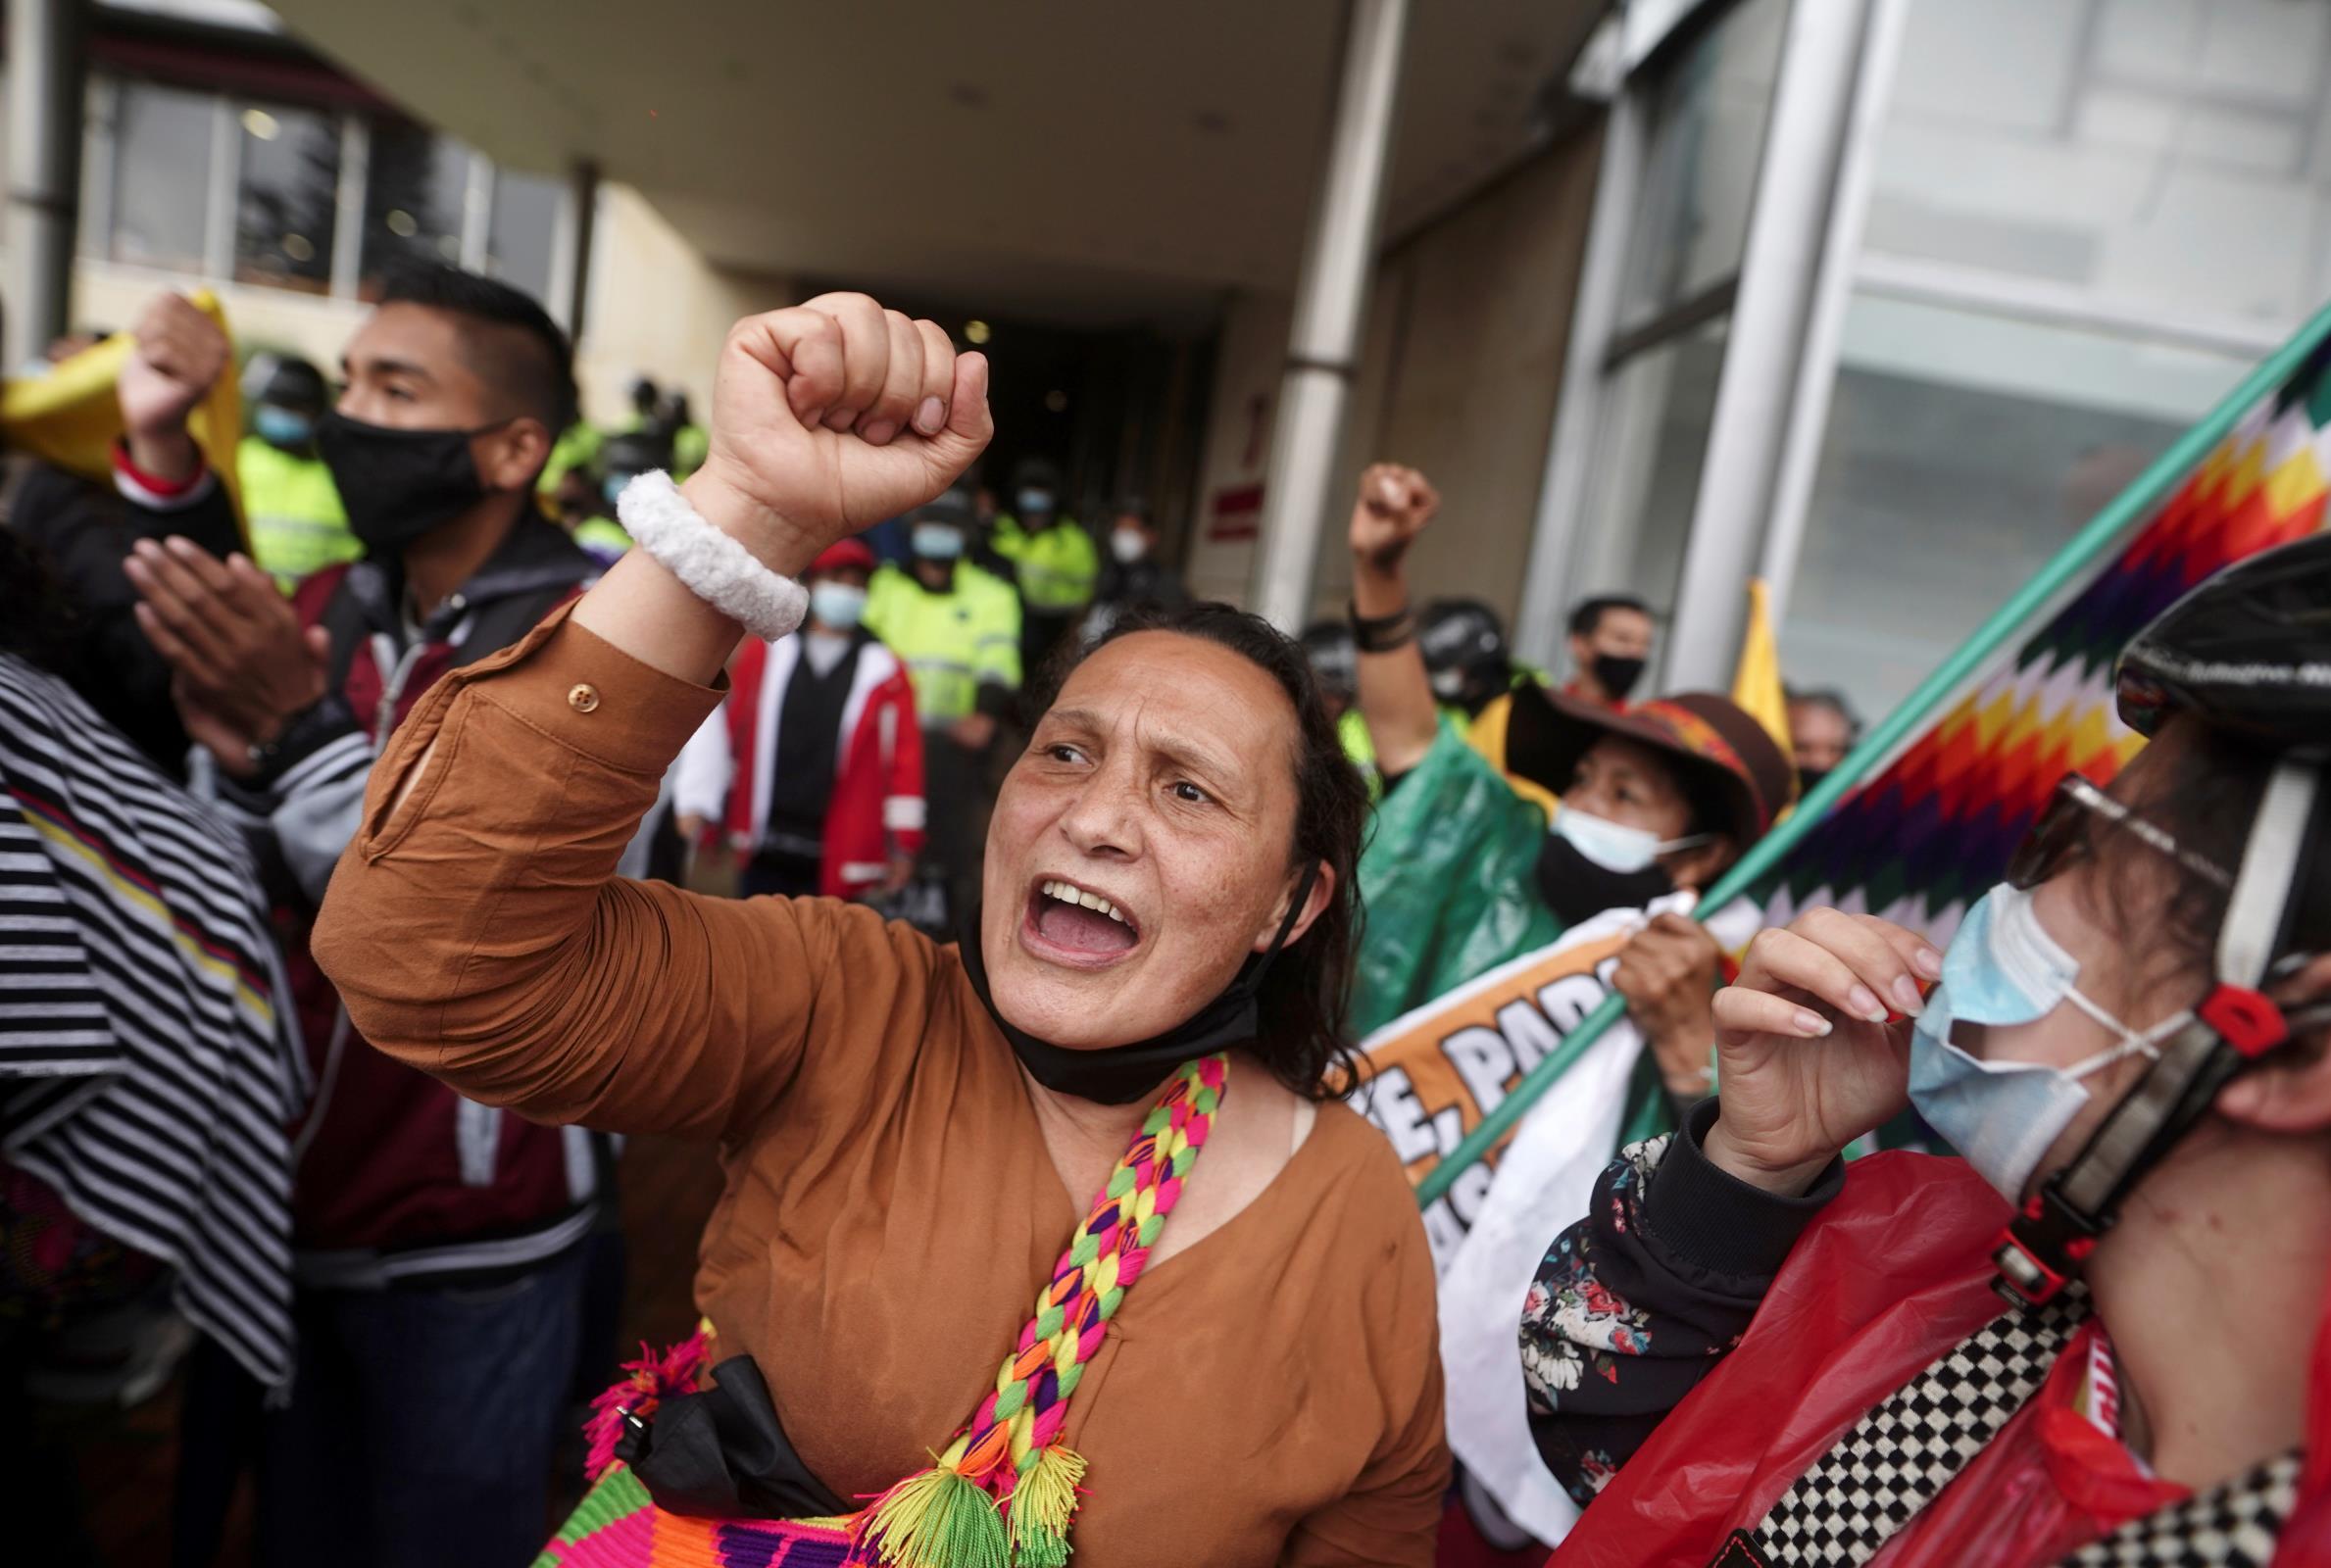 Demo<em></em>nstrators gather outside a local hotel wher<em></em>e representatives of the Inter-American Commission on Human Rights (CIDH) and unio<em></em>n leaders meet, in Bogota, Colombia June 9, 2021. REUTERS/Nathalia Angarita